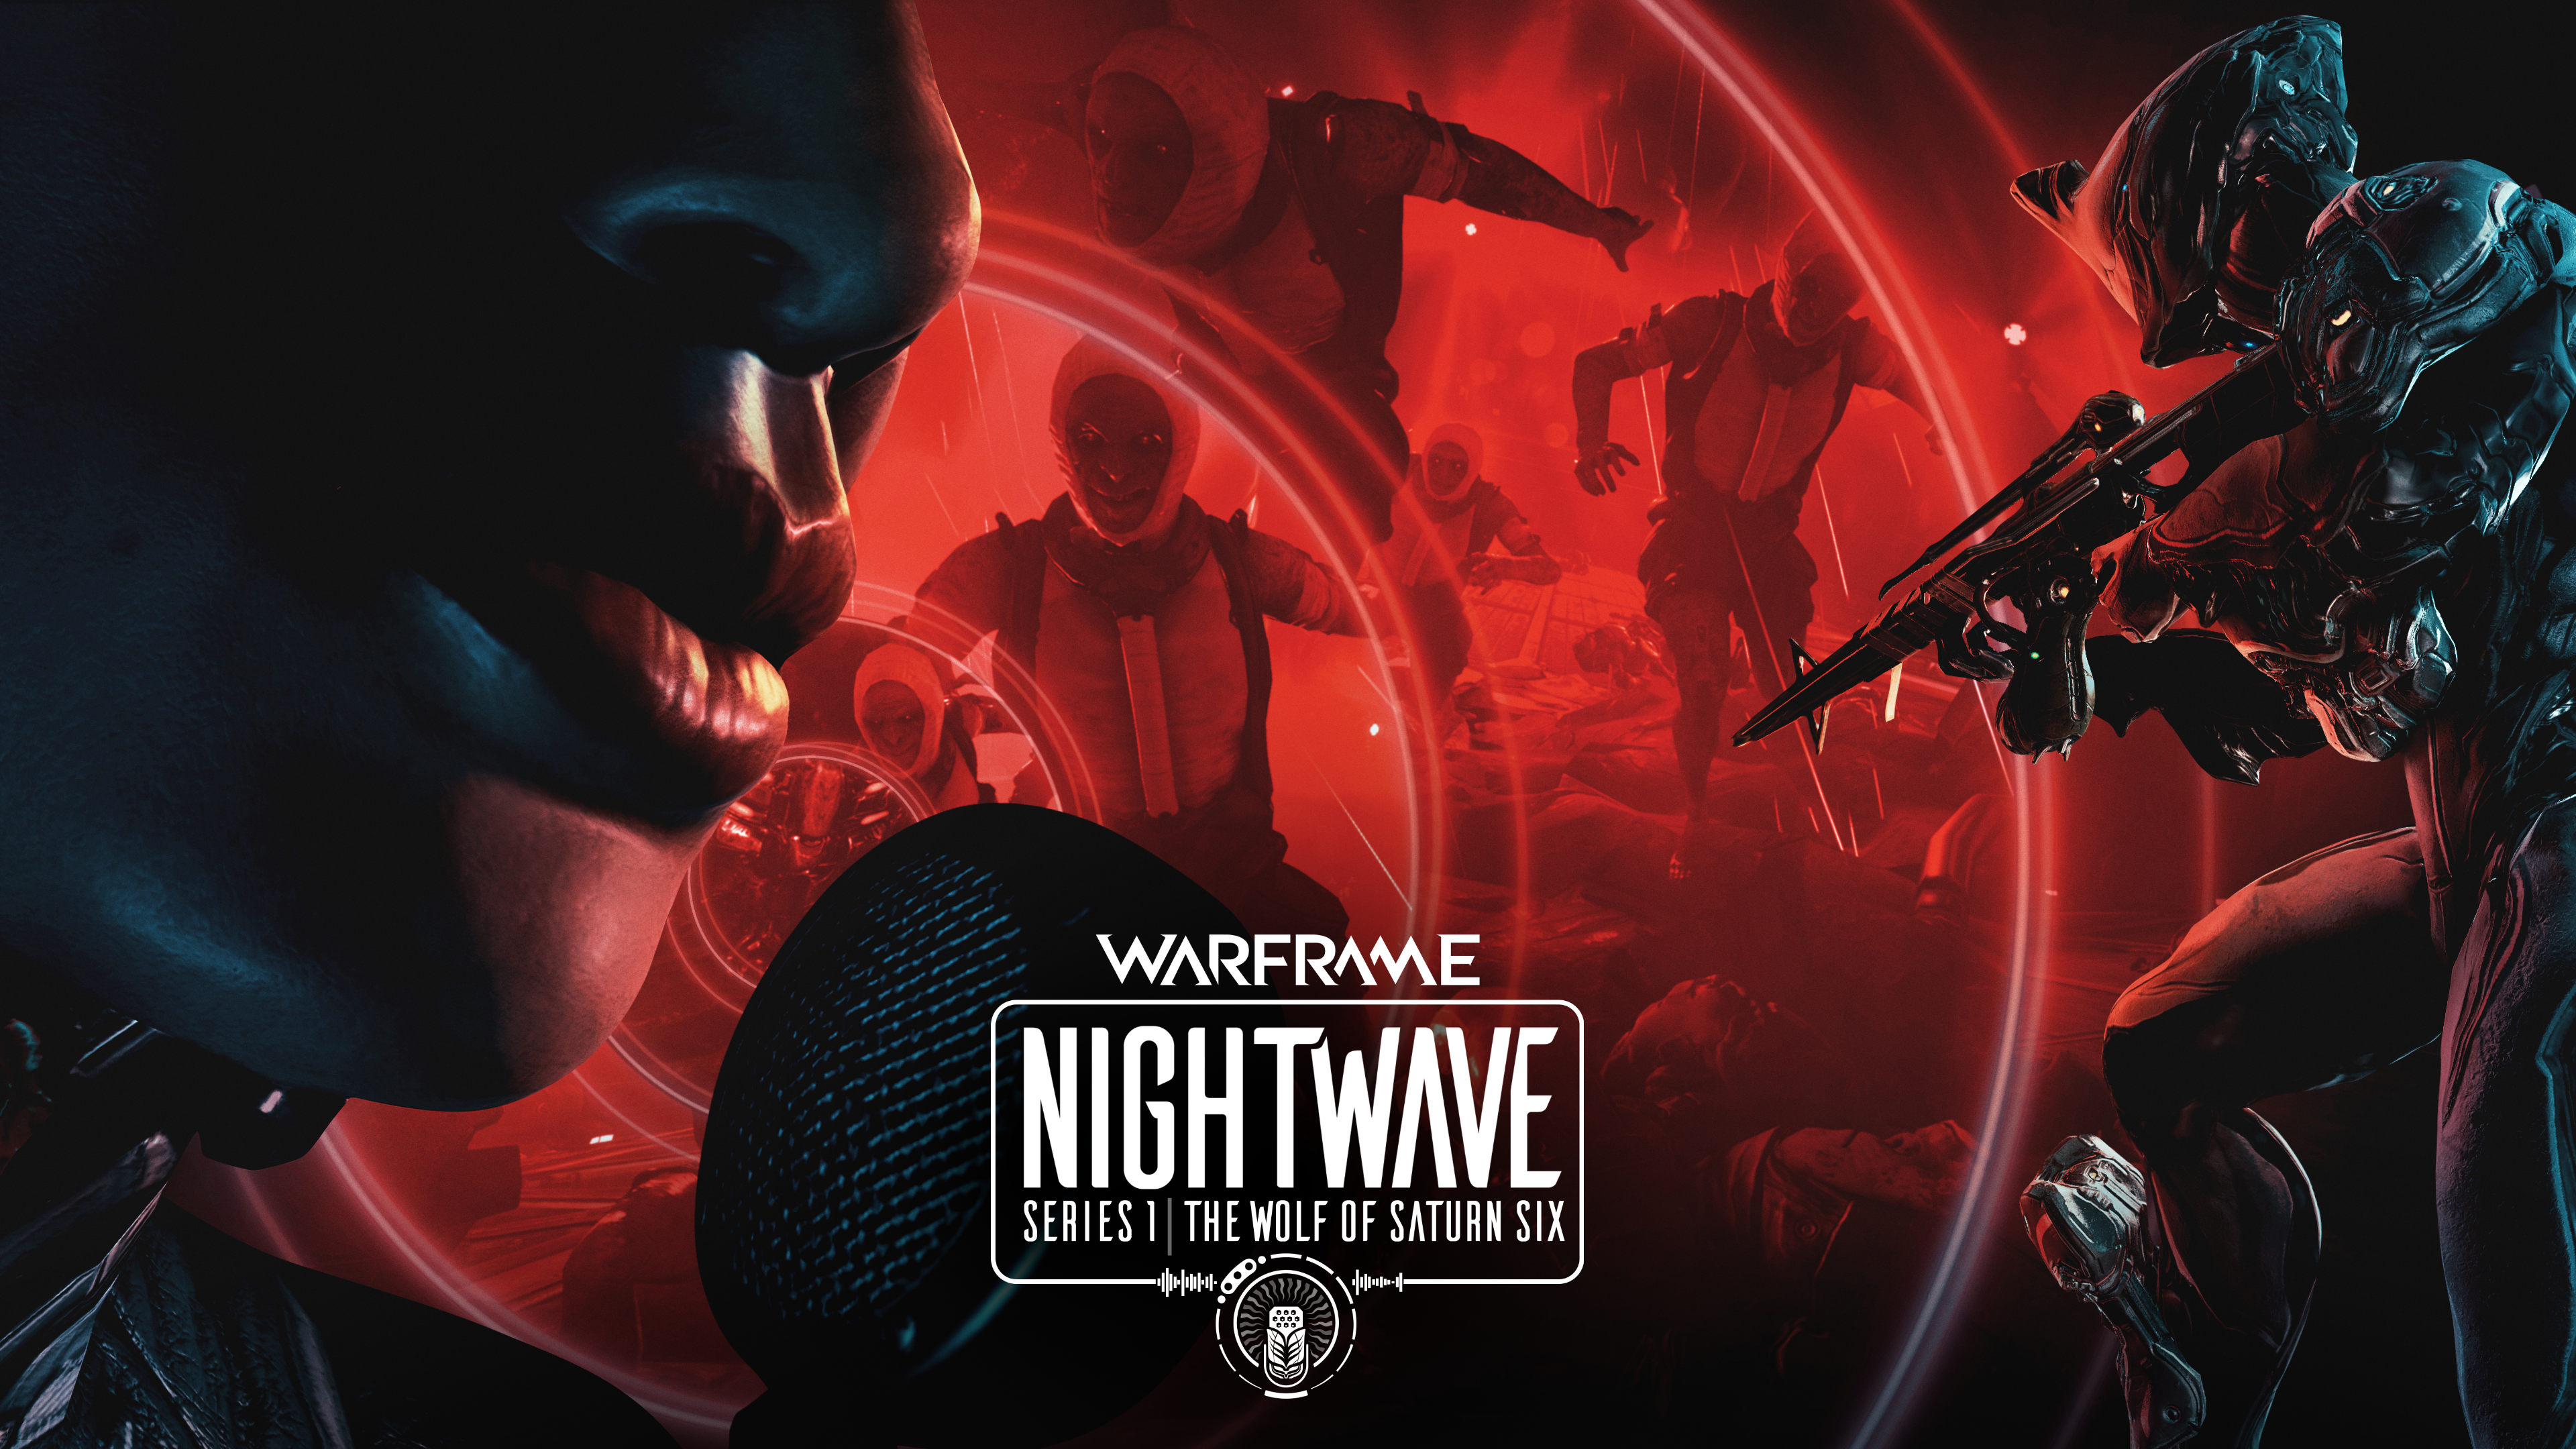 warframe-launches-nightwave-update-across-all-platforms-today-frikigamers.com.jpg